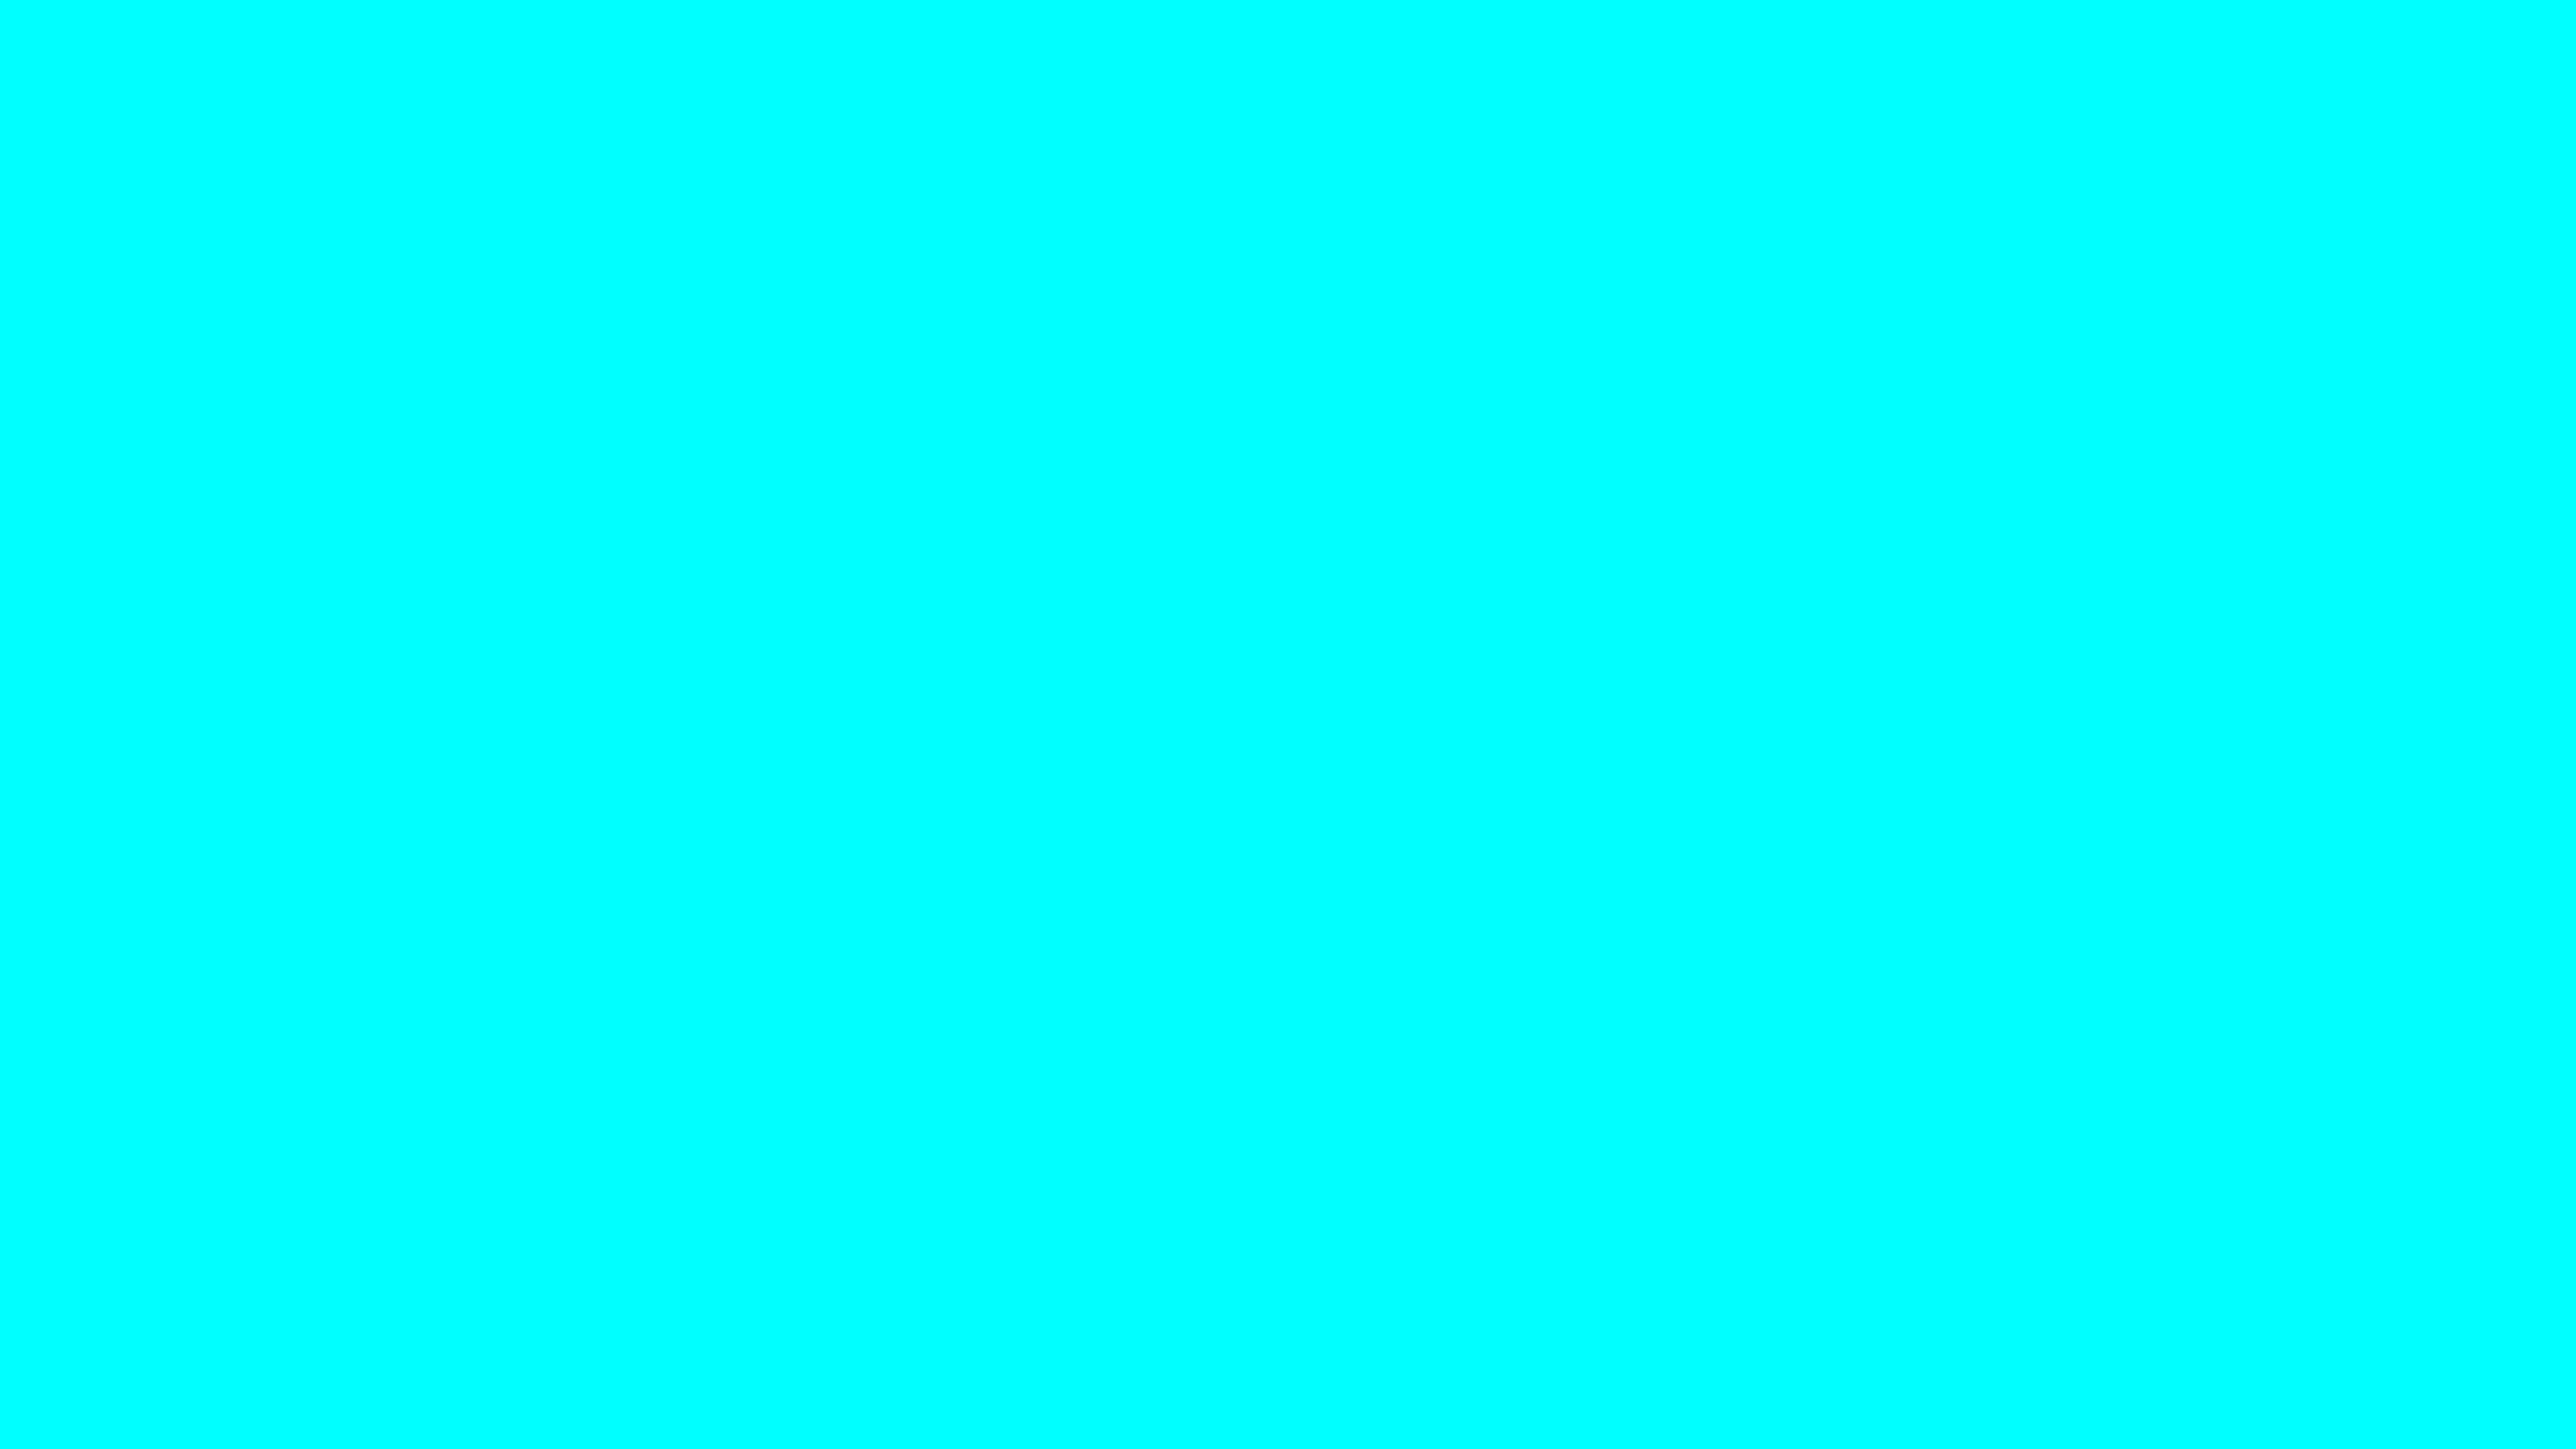 7680x4320 Cyan Solid Color Background